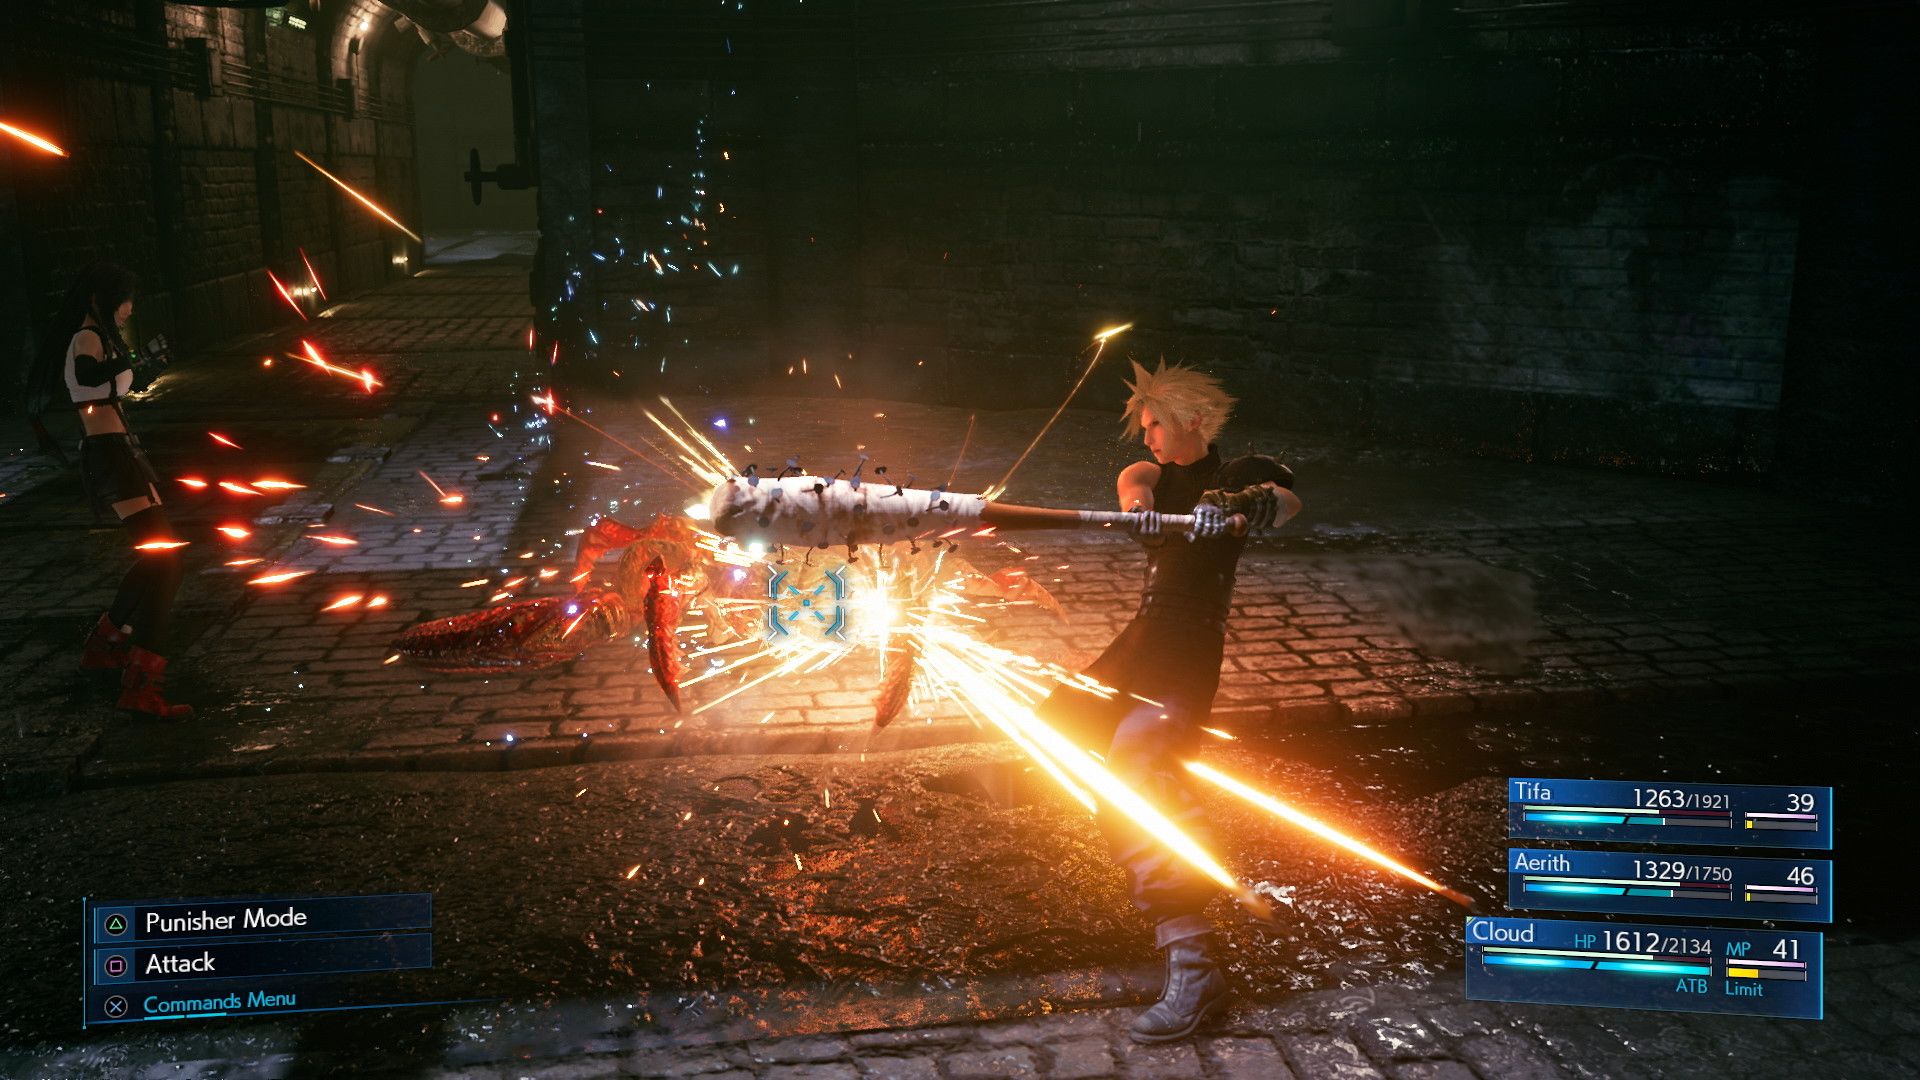 New Final Fantasy VII Remake Screenshots Show Red XIII, Side